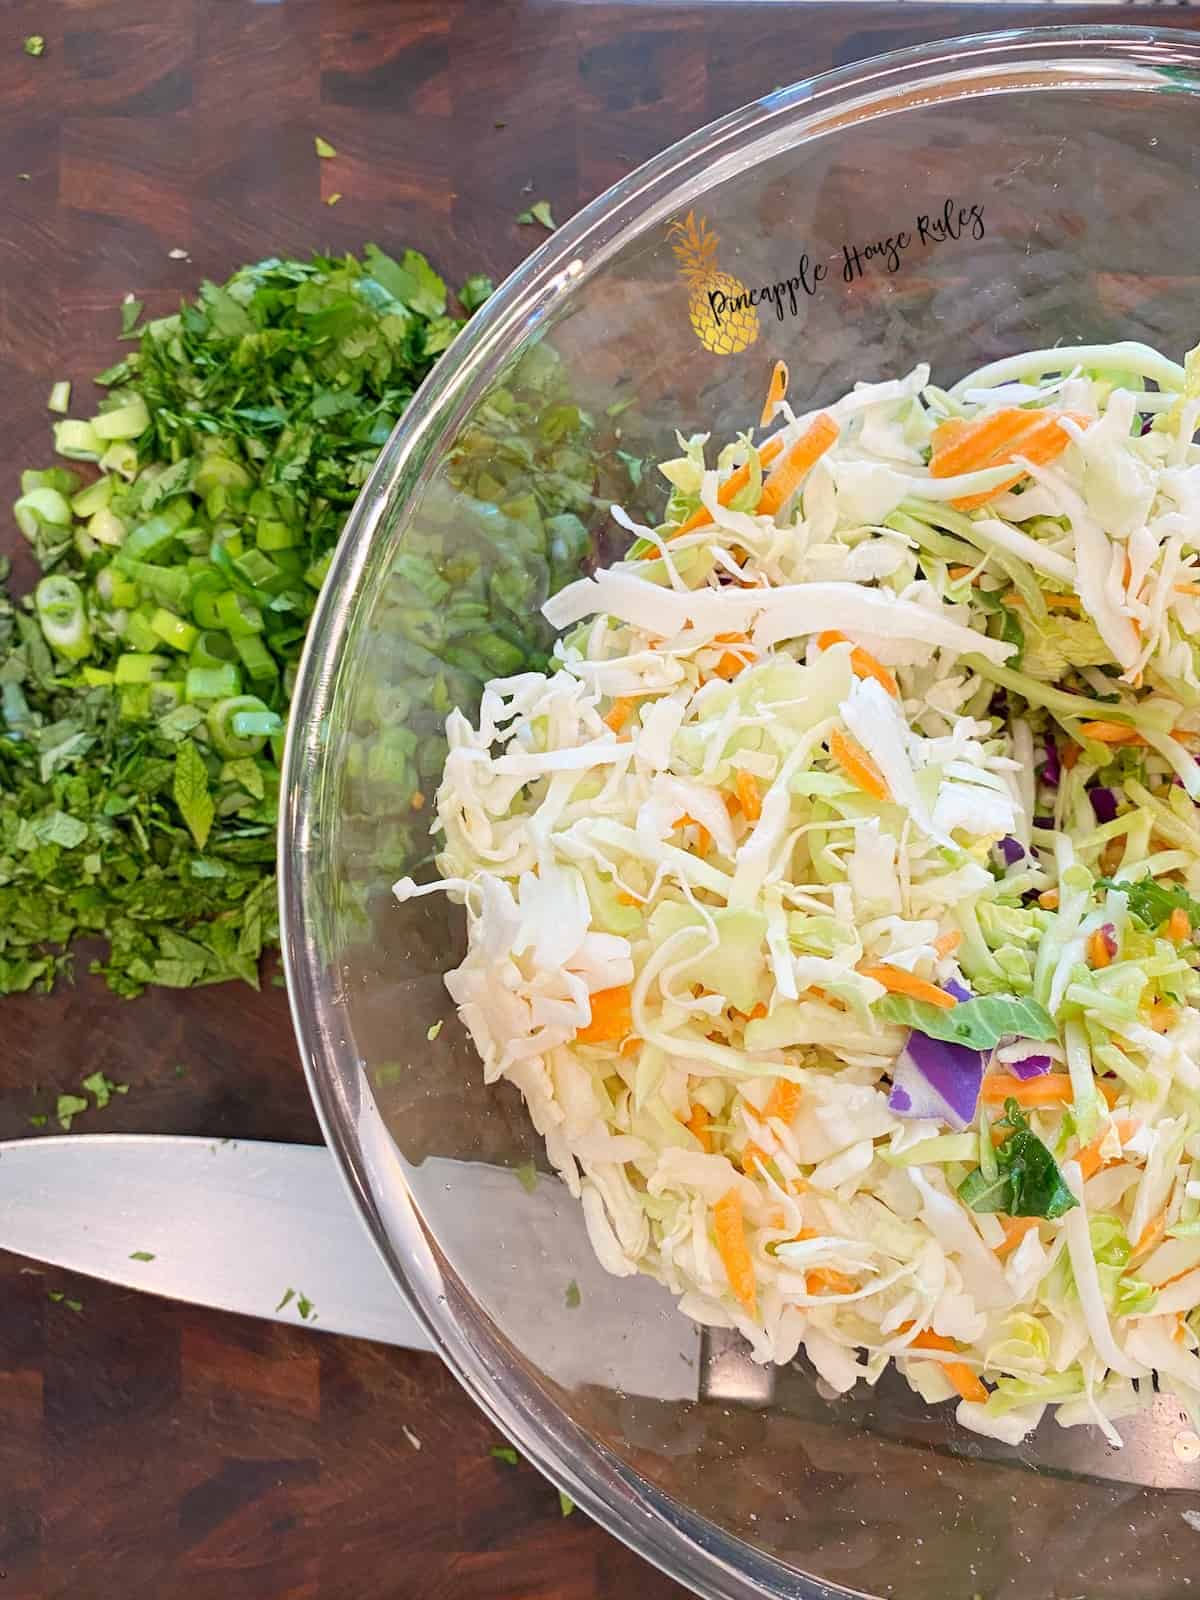 Tangy Herb Coleslaw